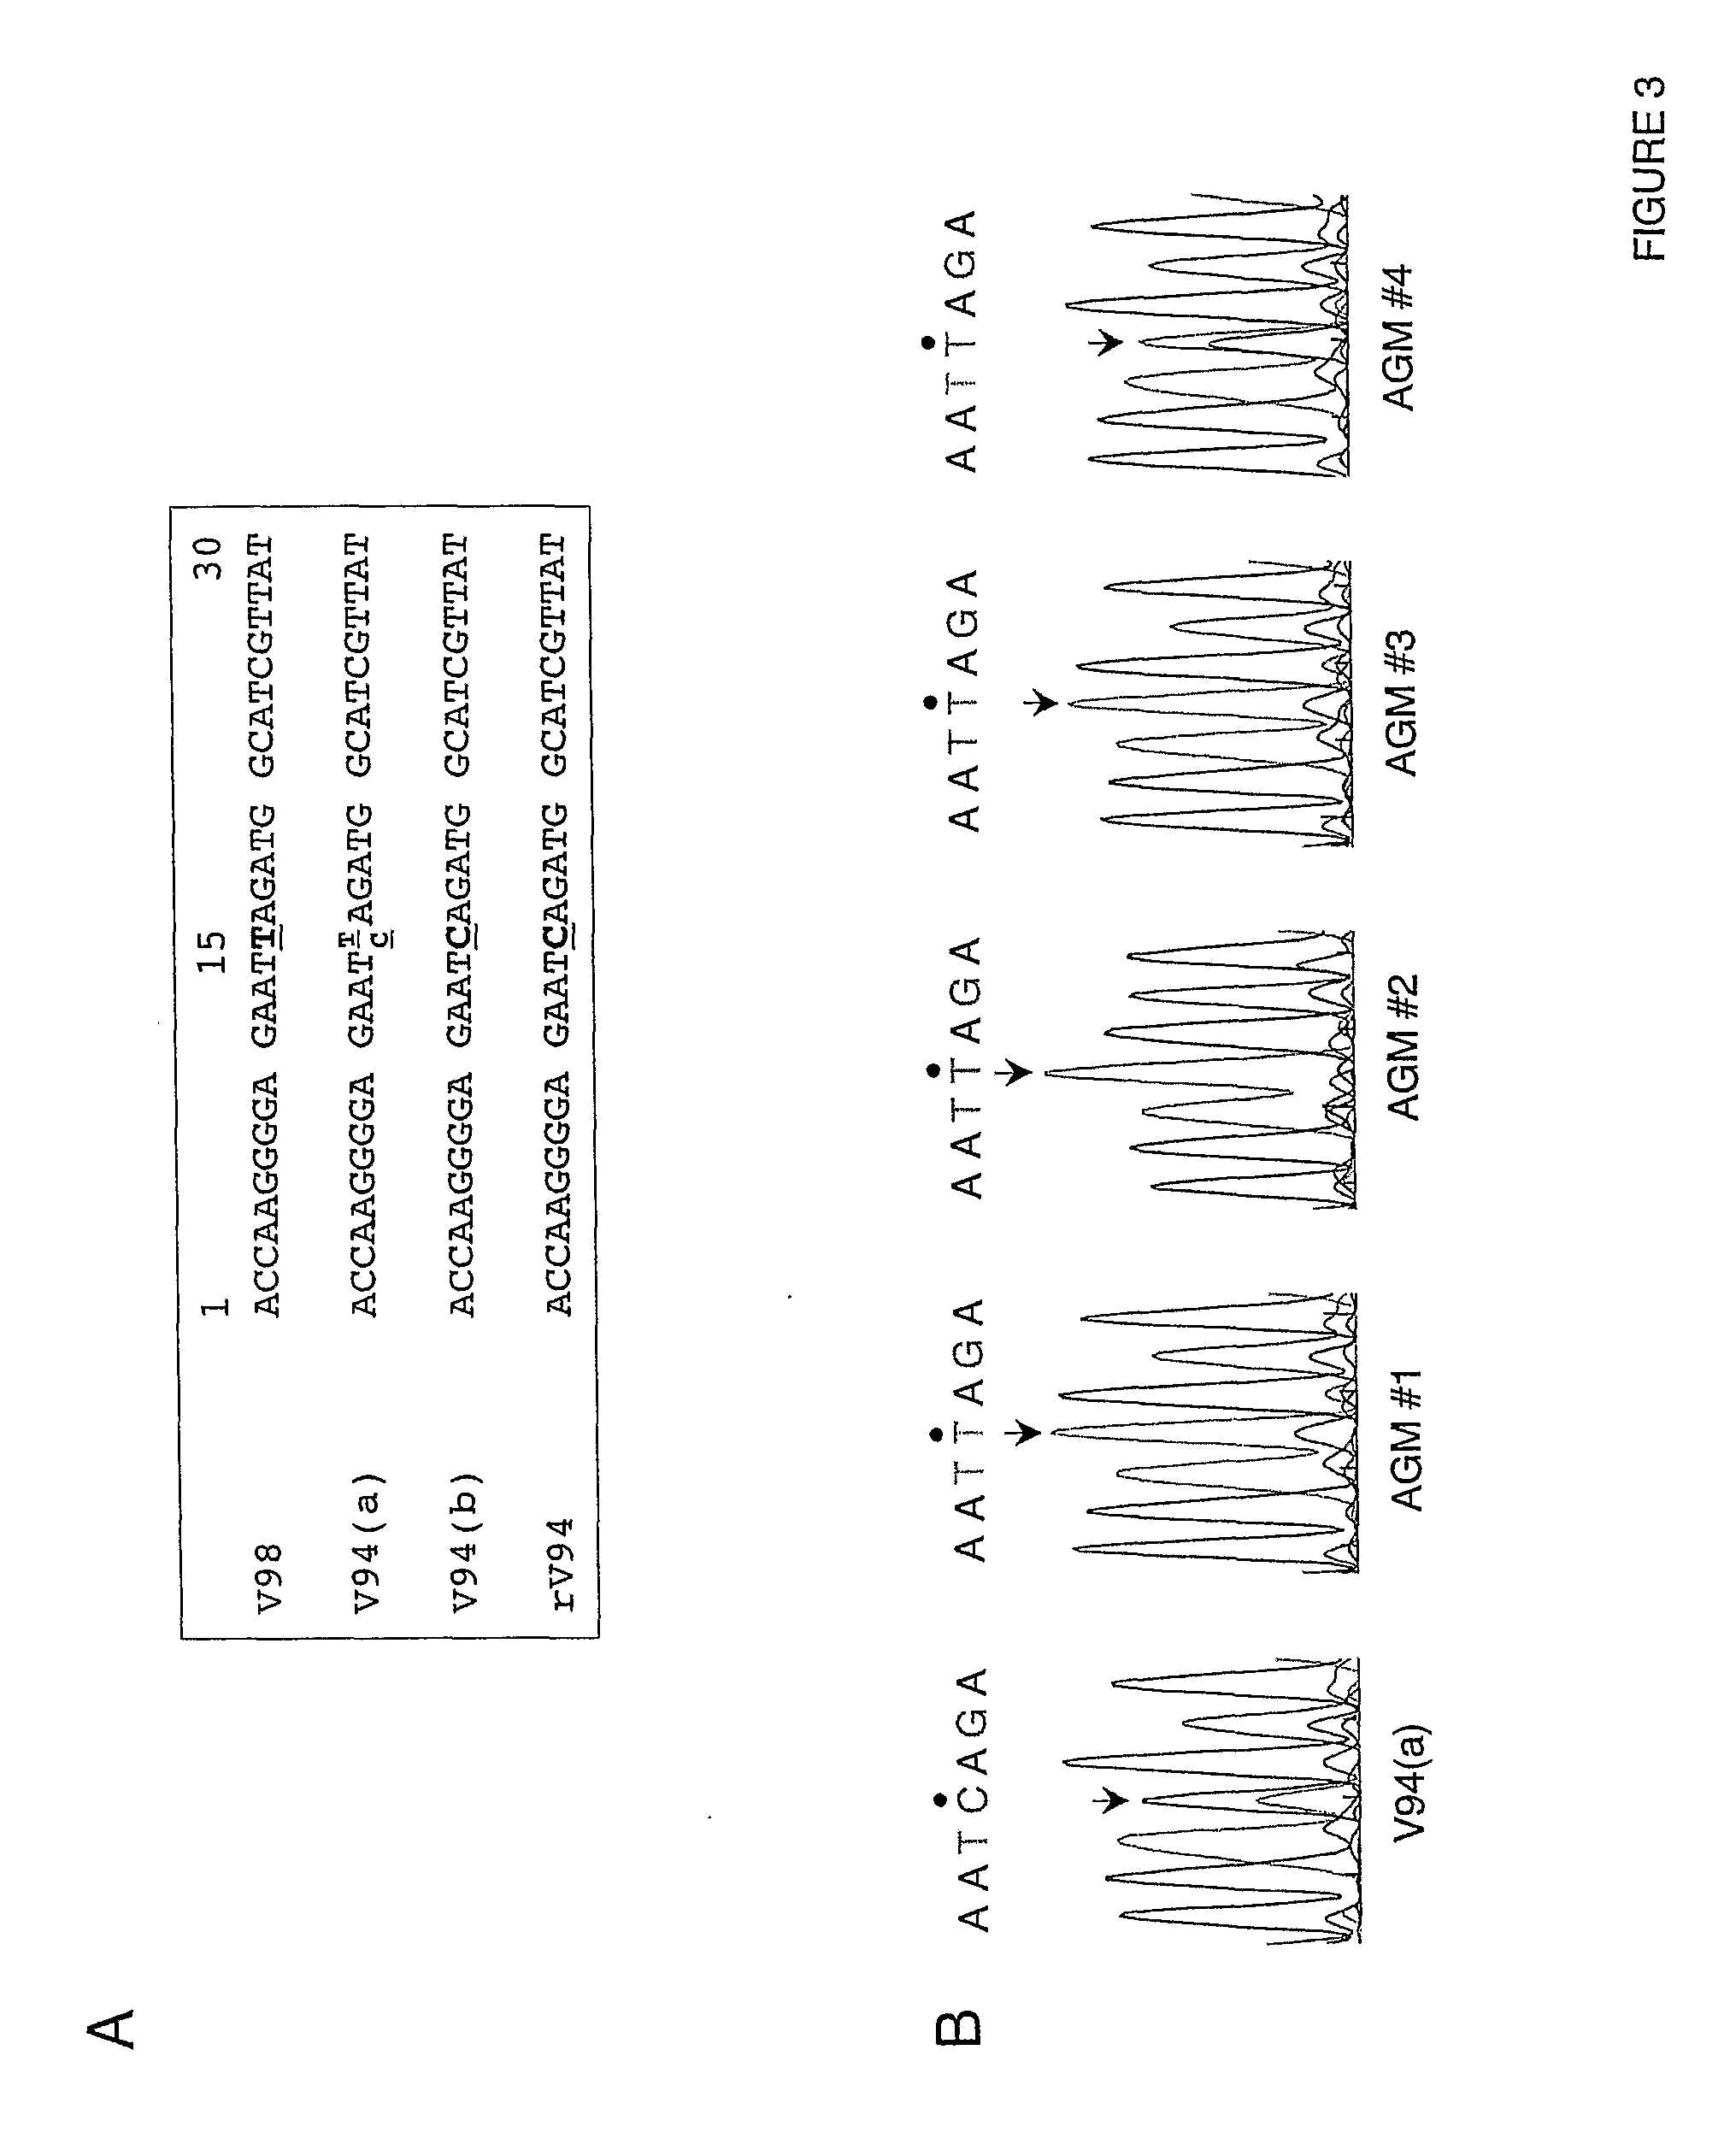 Attenuated human parainfluenza virus, methods and uses thereof